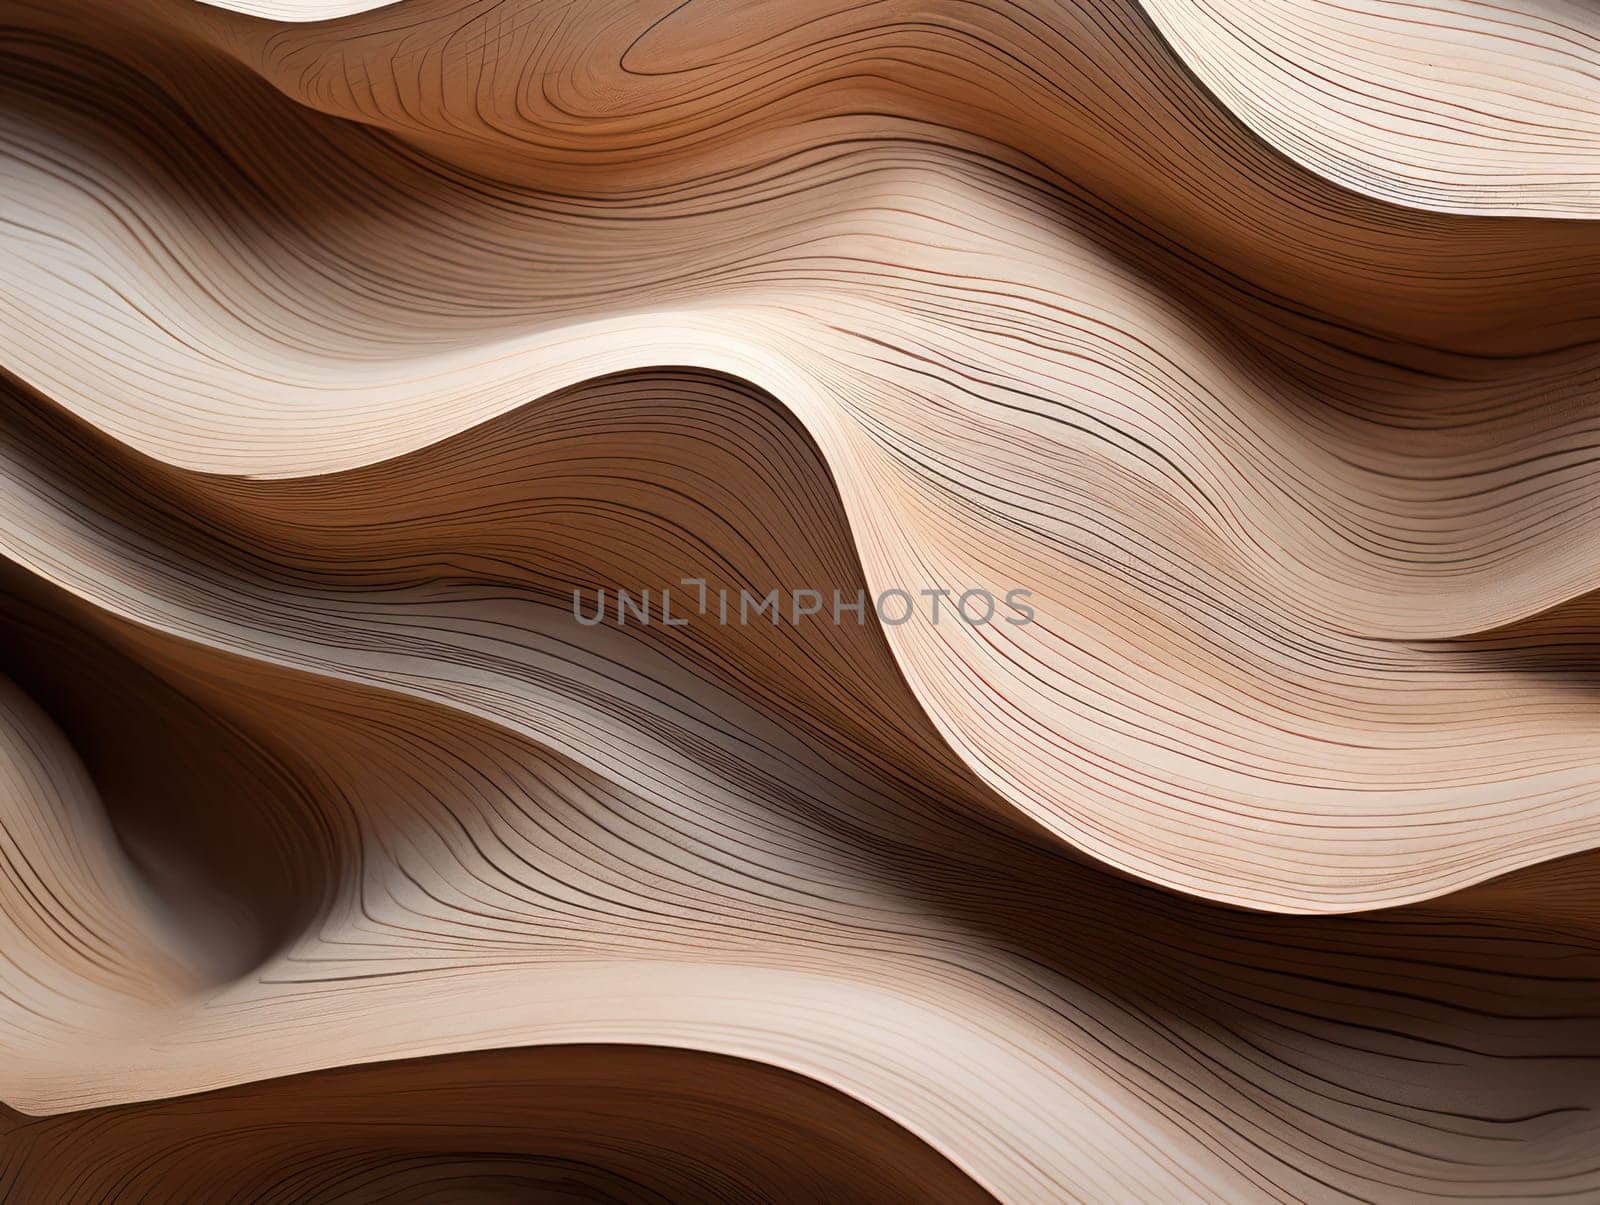 Flowing Waves: Abstract Design on Textured Background by Vichizh